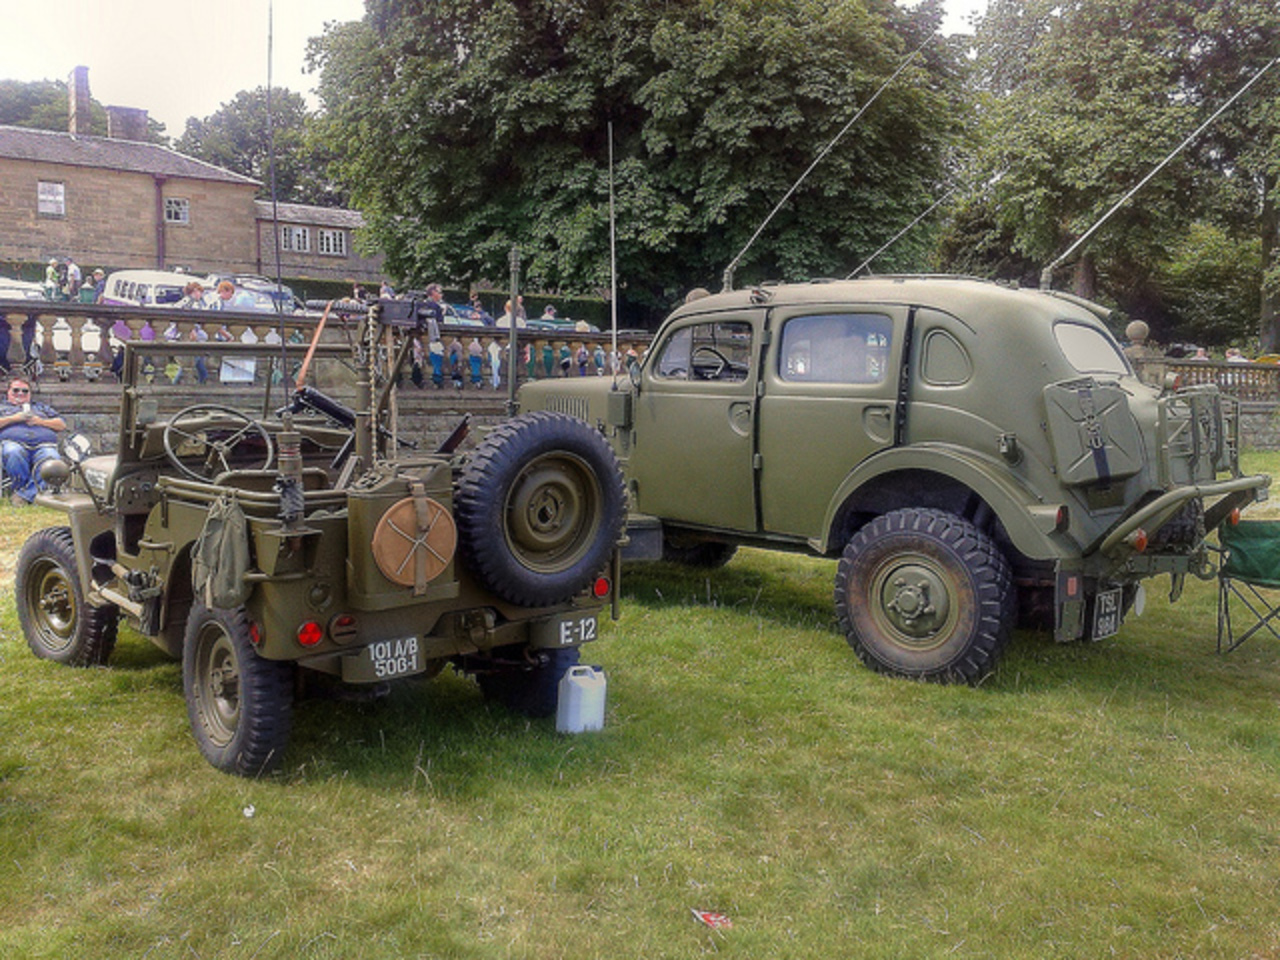 Willys Jeep and Volvo TP21 Sugga Radiocar Wortley Hall Vintage Vehicle Rally